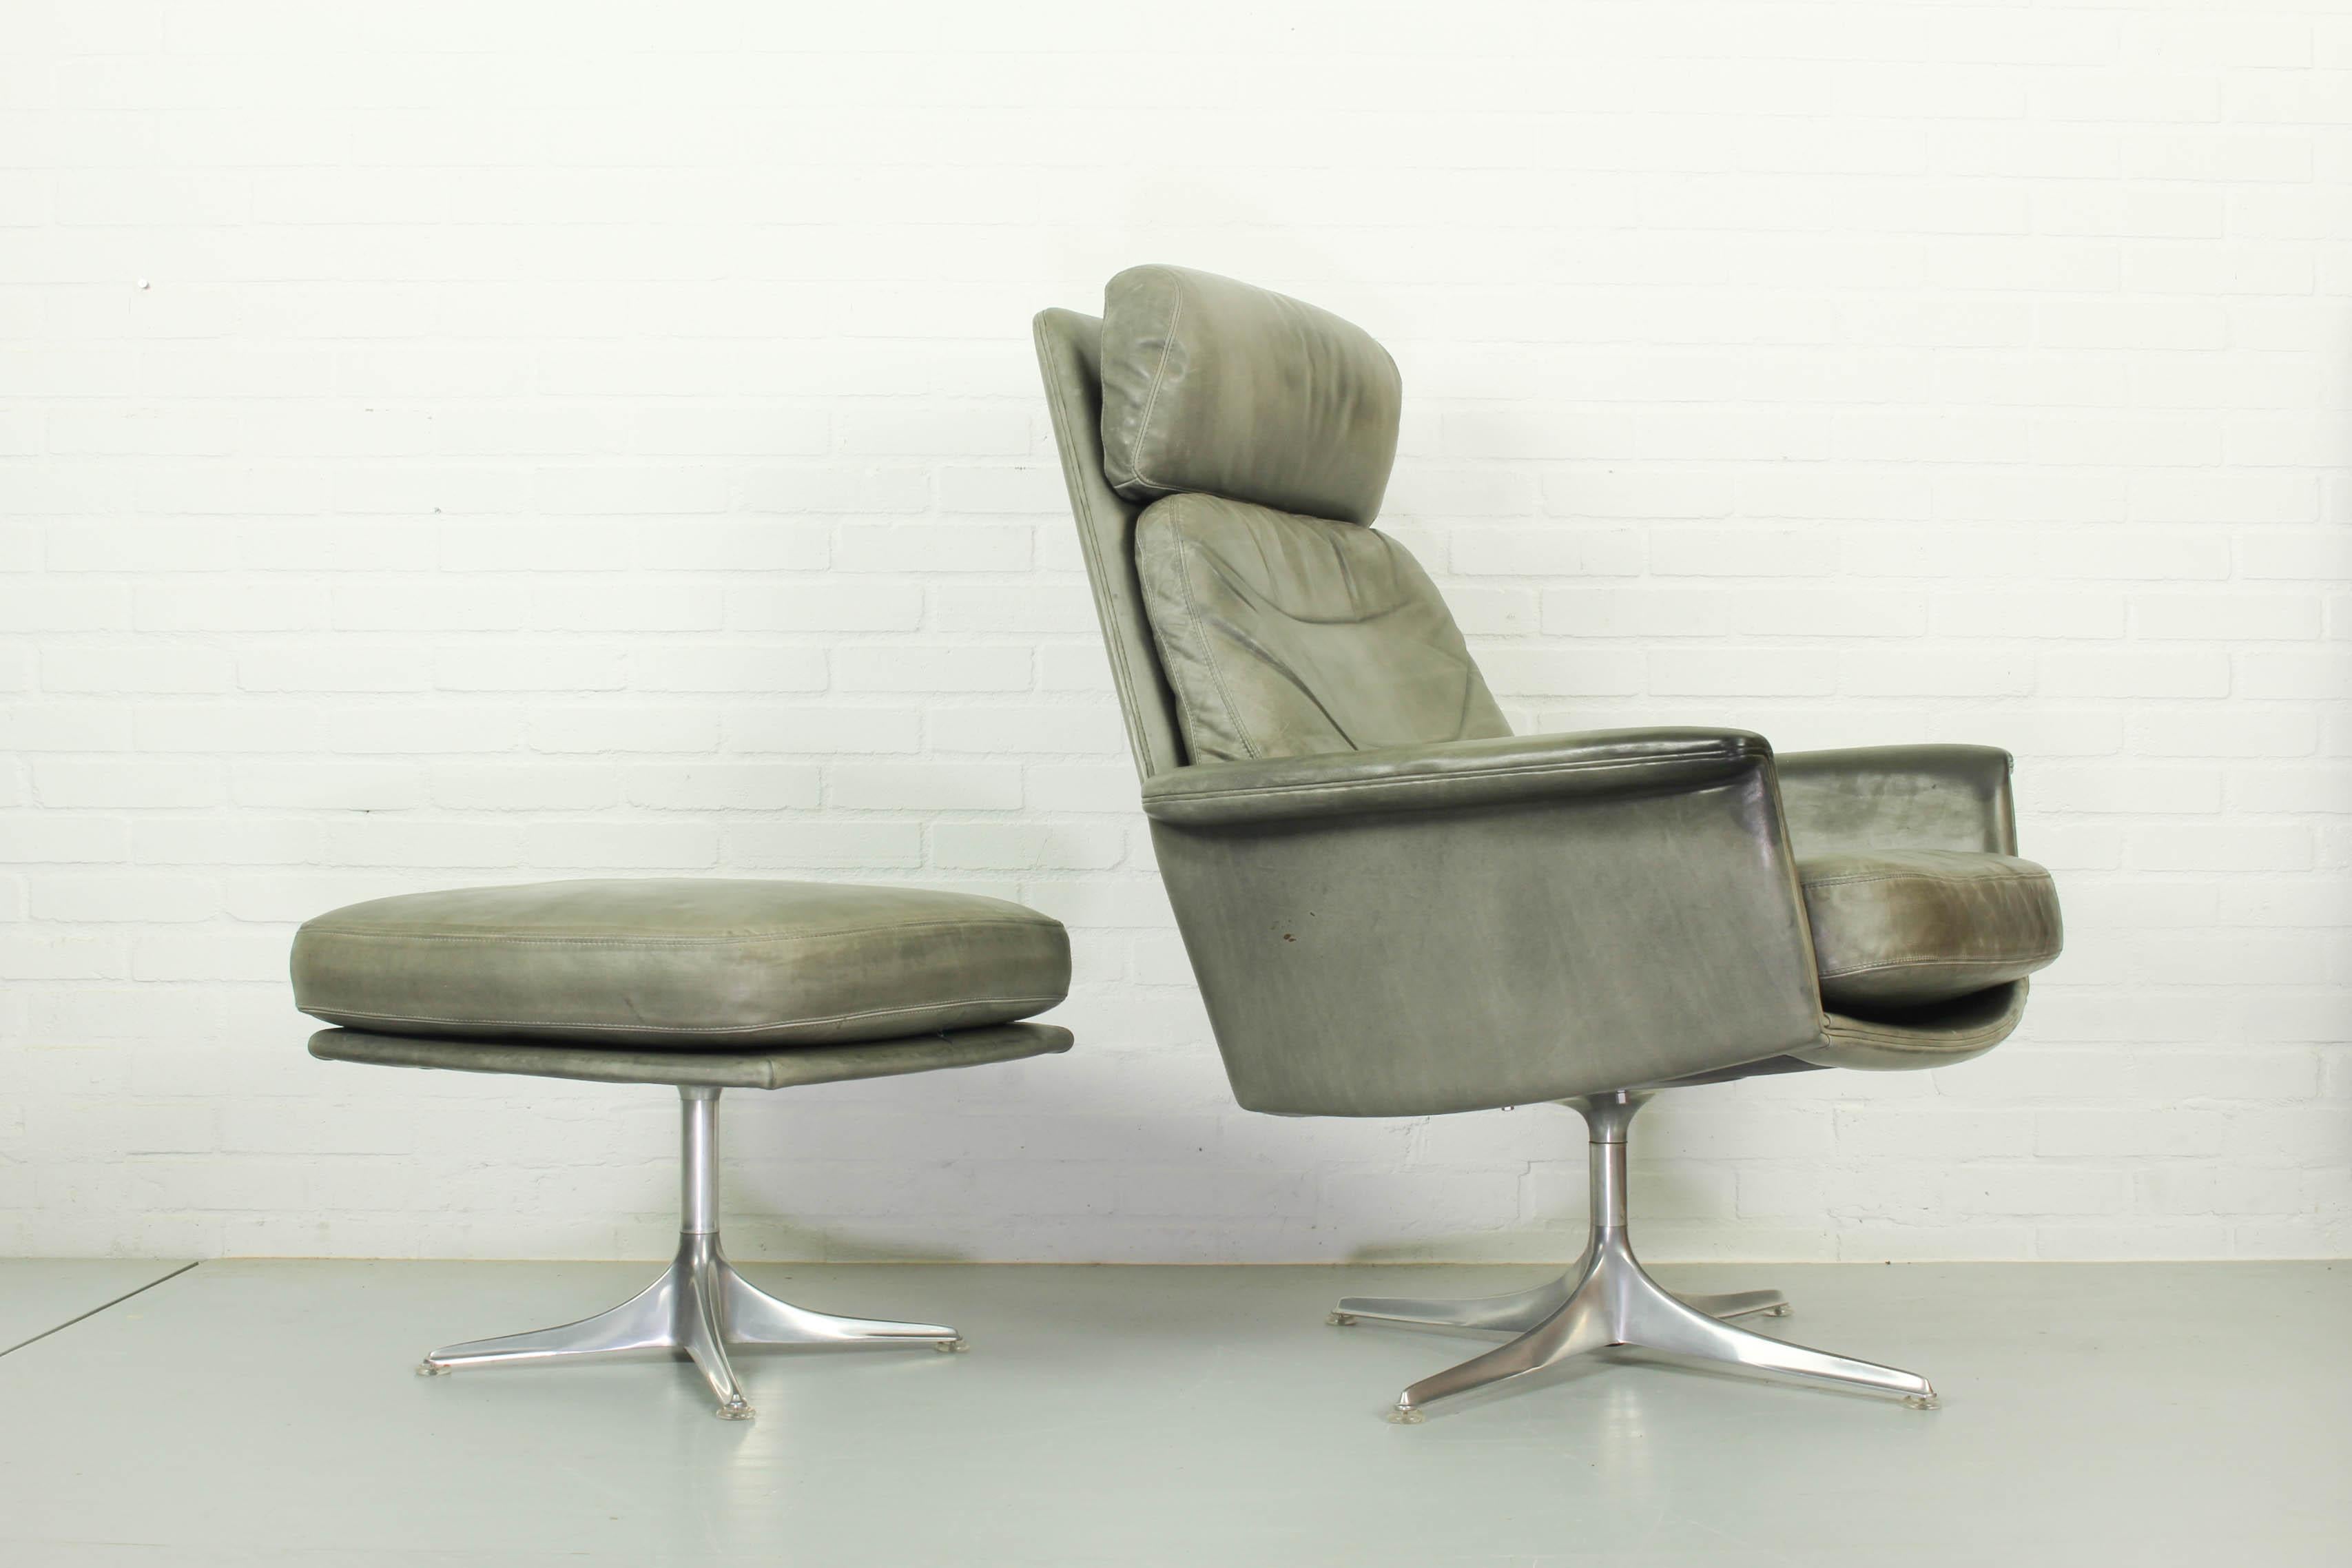 German Sedia Swivel Highback Chair with Matching Ottoman by Horst Brüning for COR, 1960 For Sale